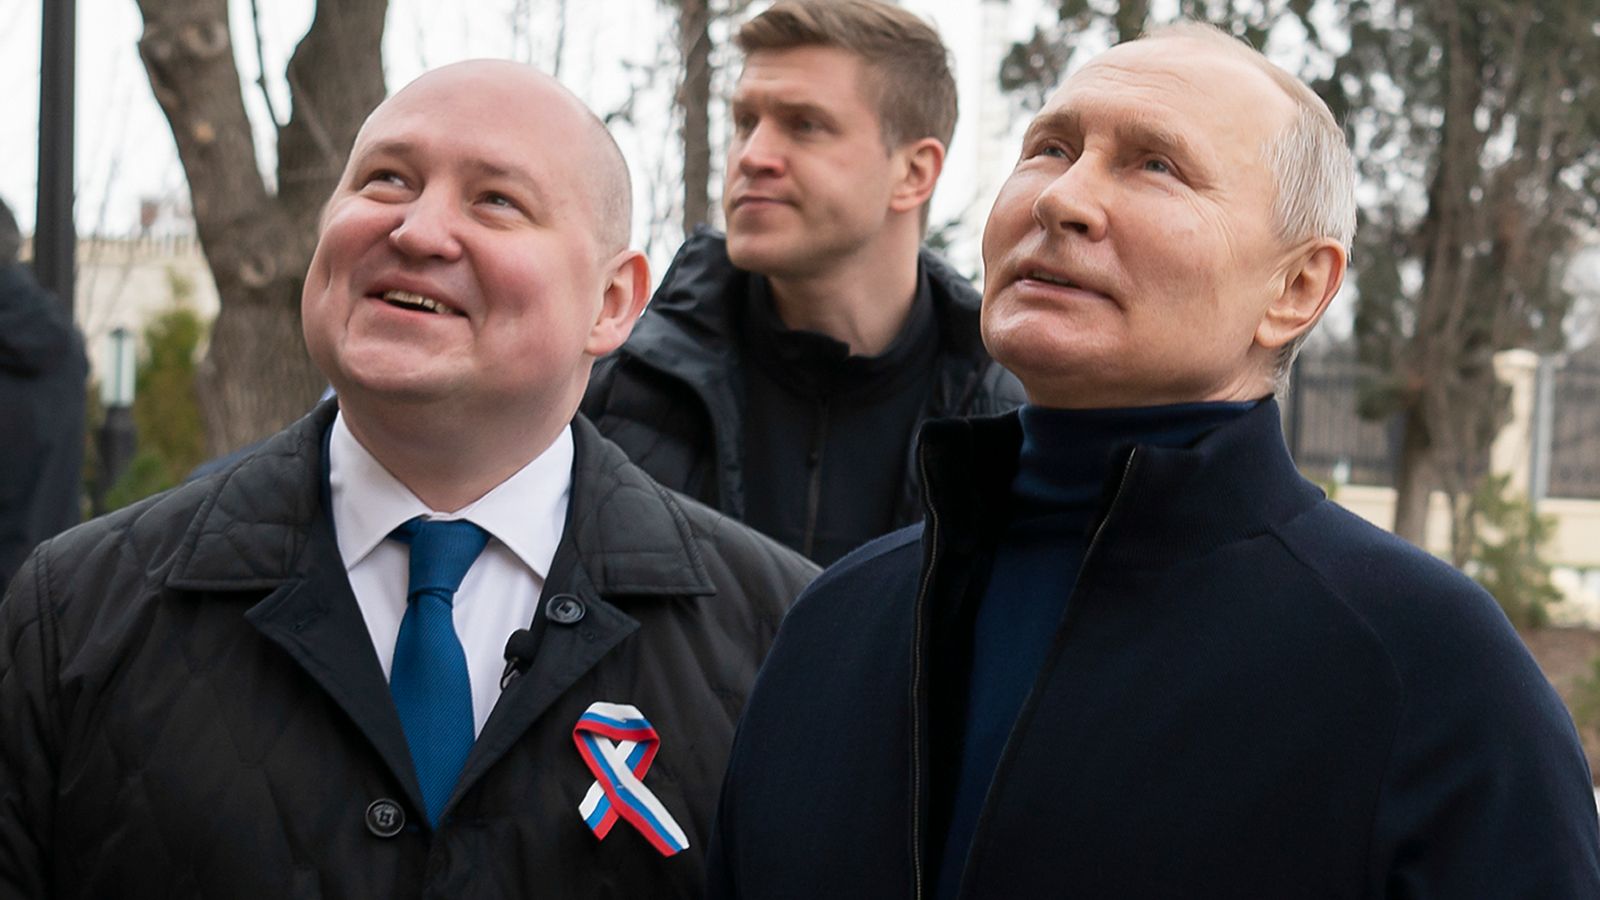 Putin in Crimea to mark nine years since annexation - a day after war crimes arrest warrant